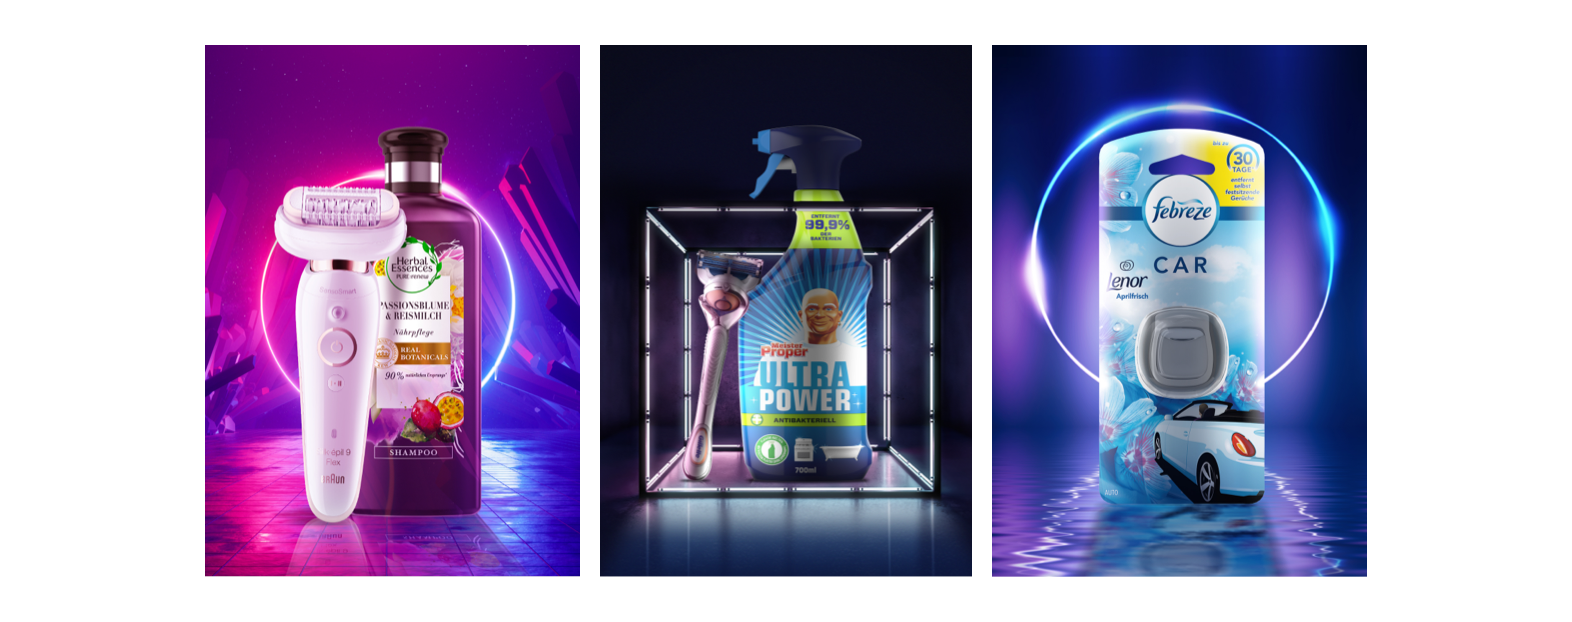 Three promotional images for products of "for me" brands: Herbal Essences, Braun, Meister Proper, Gillette and Febreze